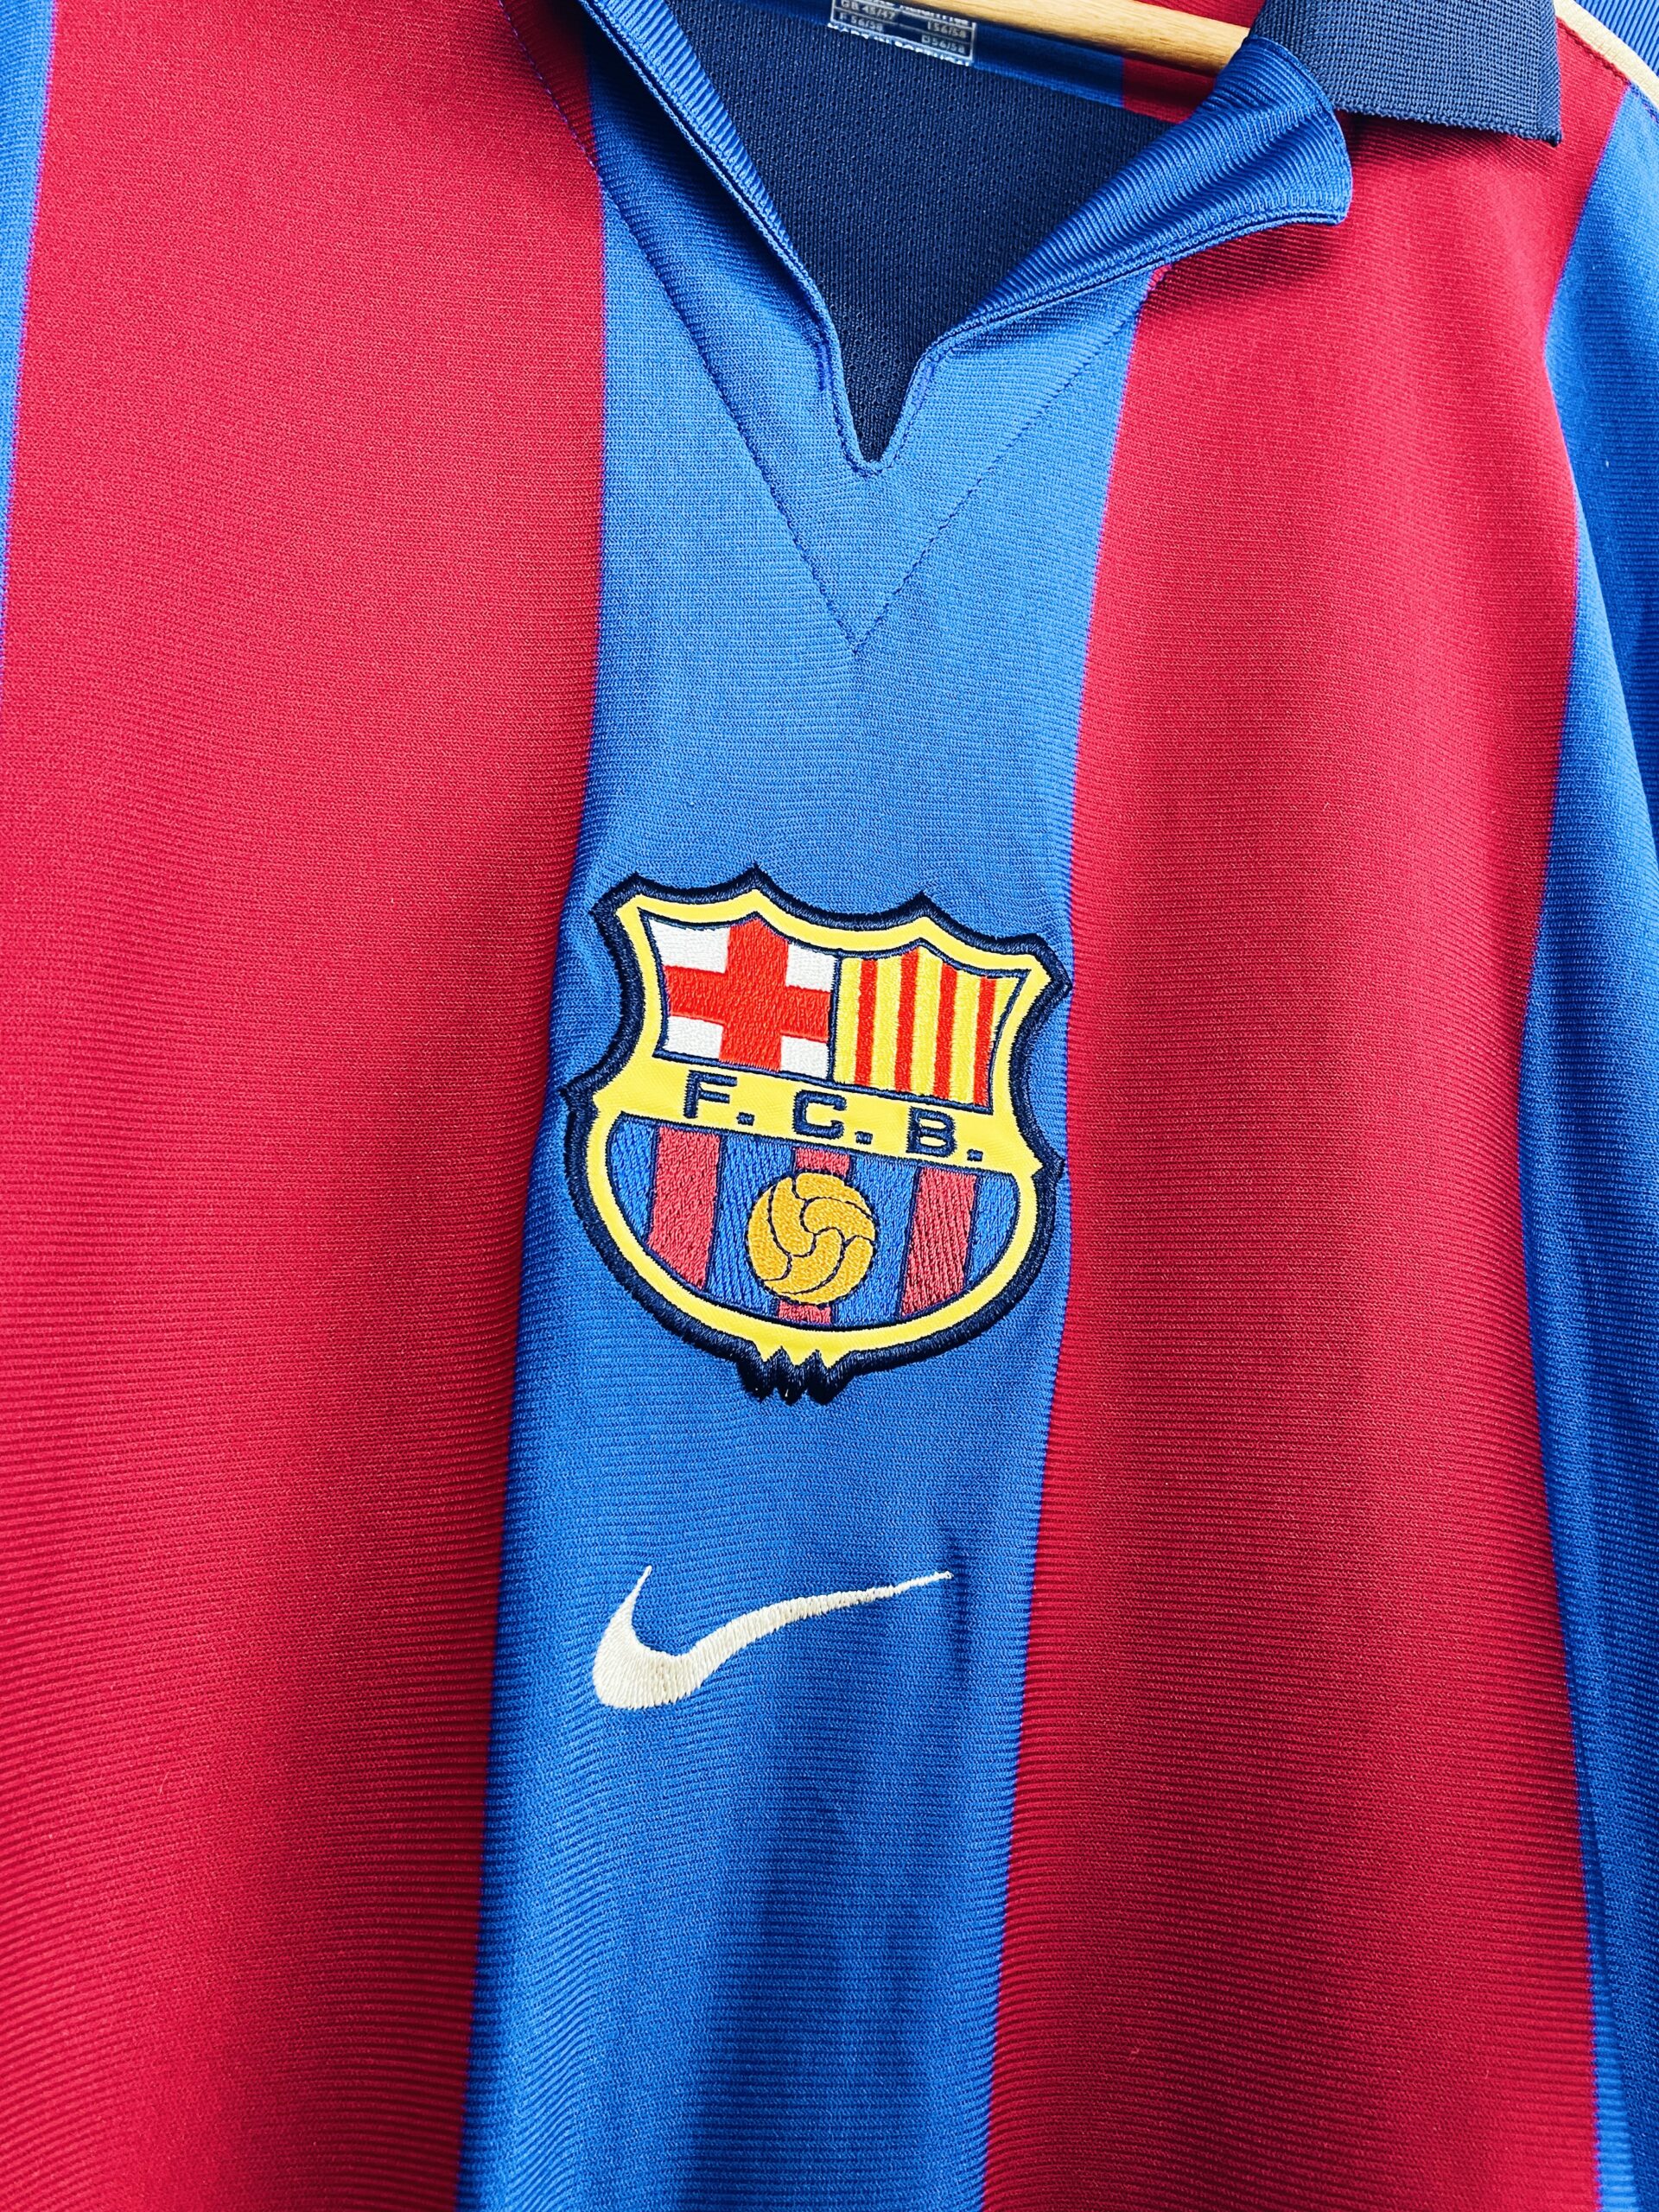 maillot barcelone 2002